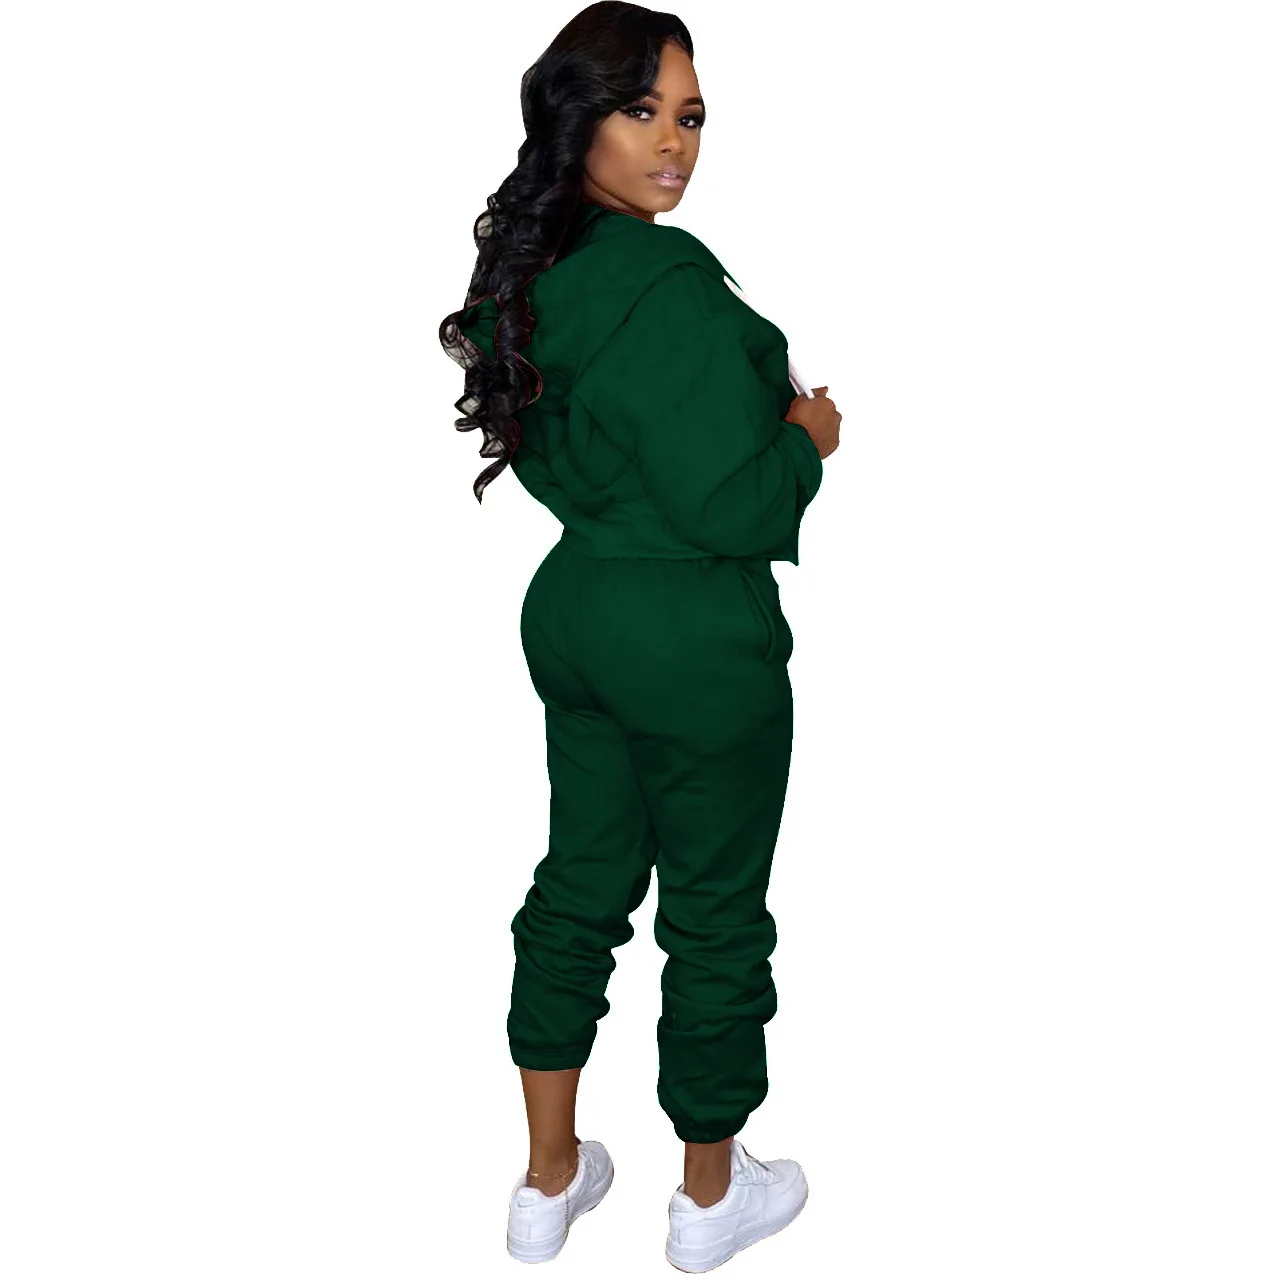 

Ladies Two Piece Polyester Custom Jogger Women Jogging Sweatsuit Winter Autumn Casual Set Fitted Plus Size Tracksuits for Women, Pictures showed